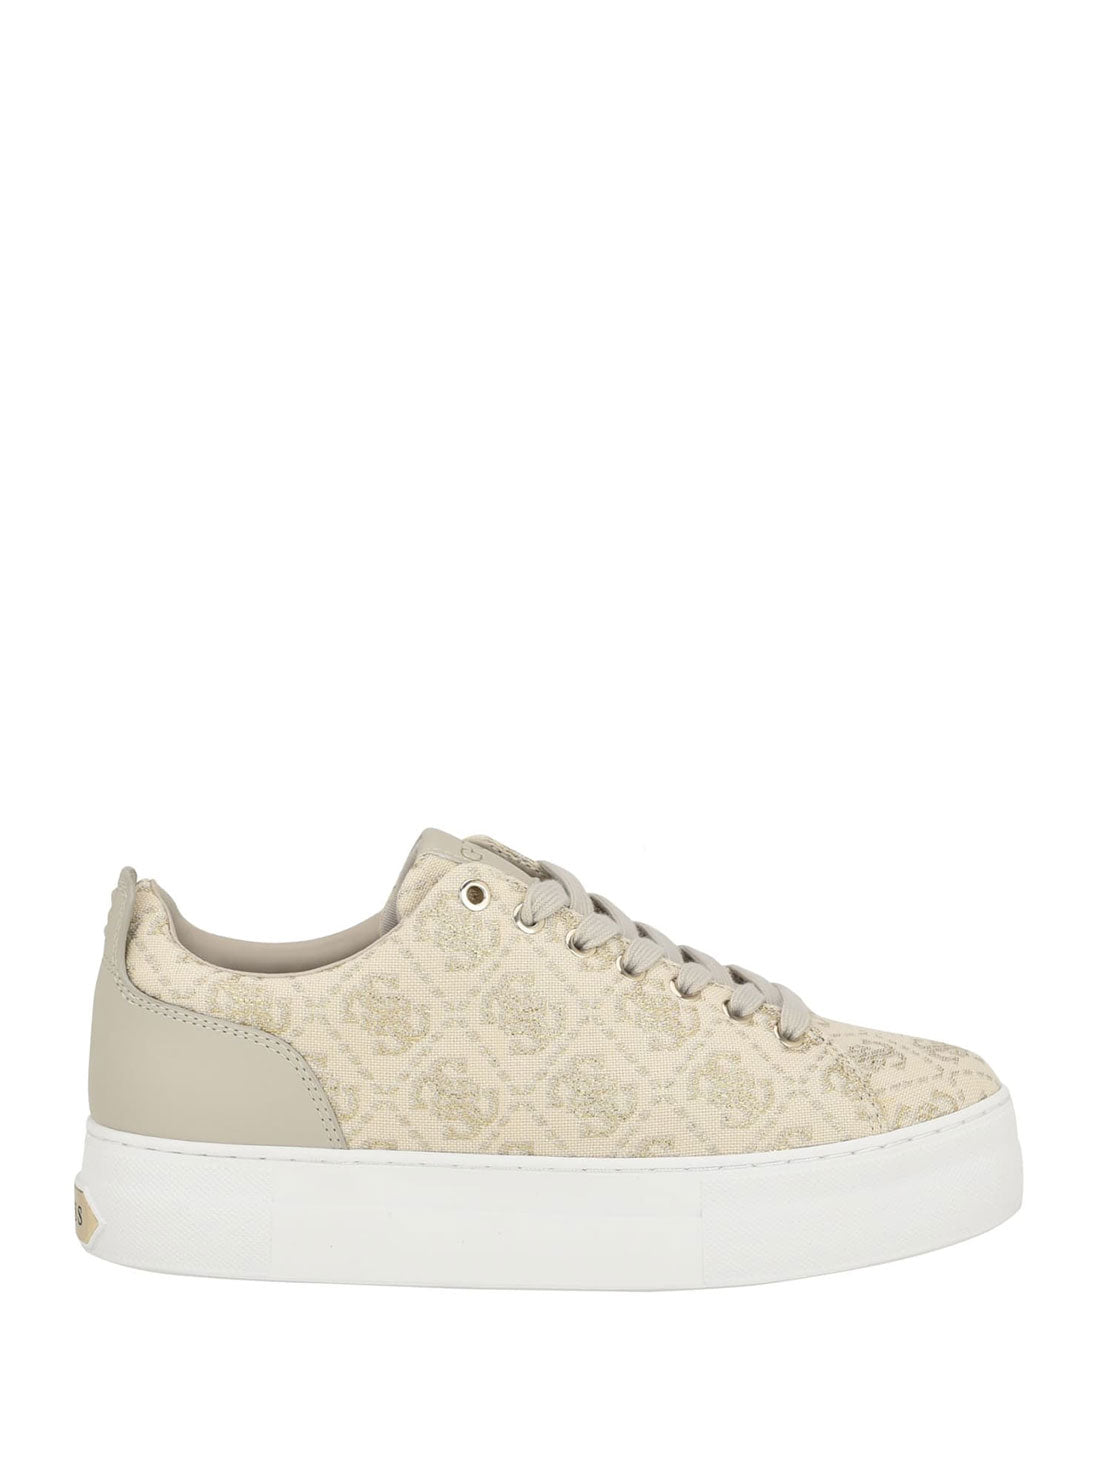 GUESS Gold Logo Giaa Low-Top Sneakers side view